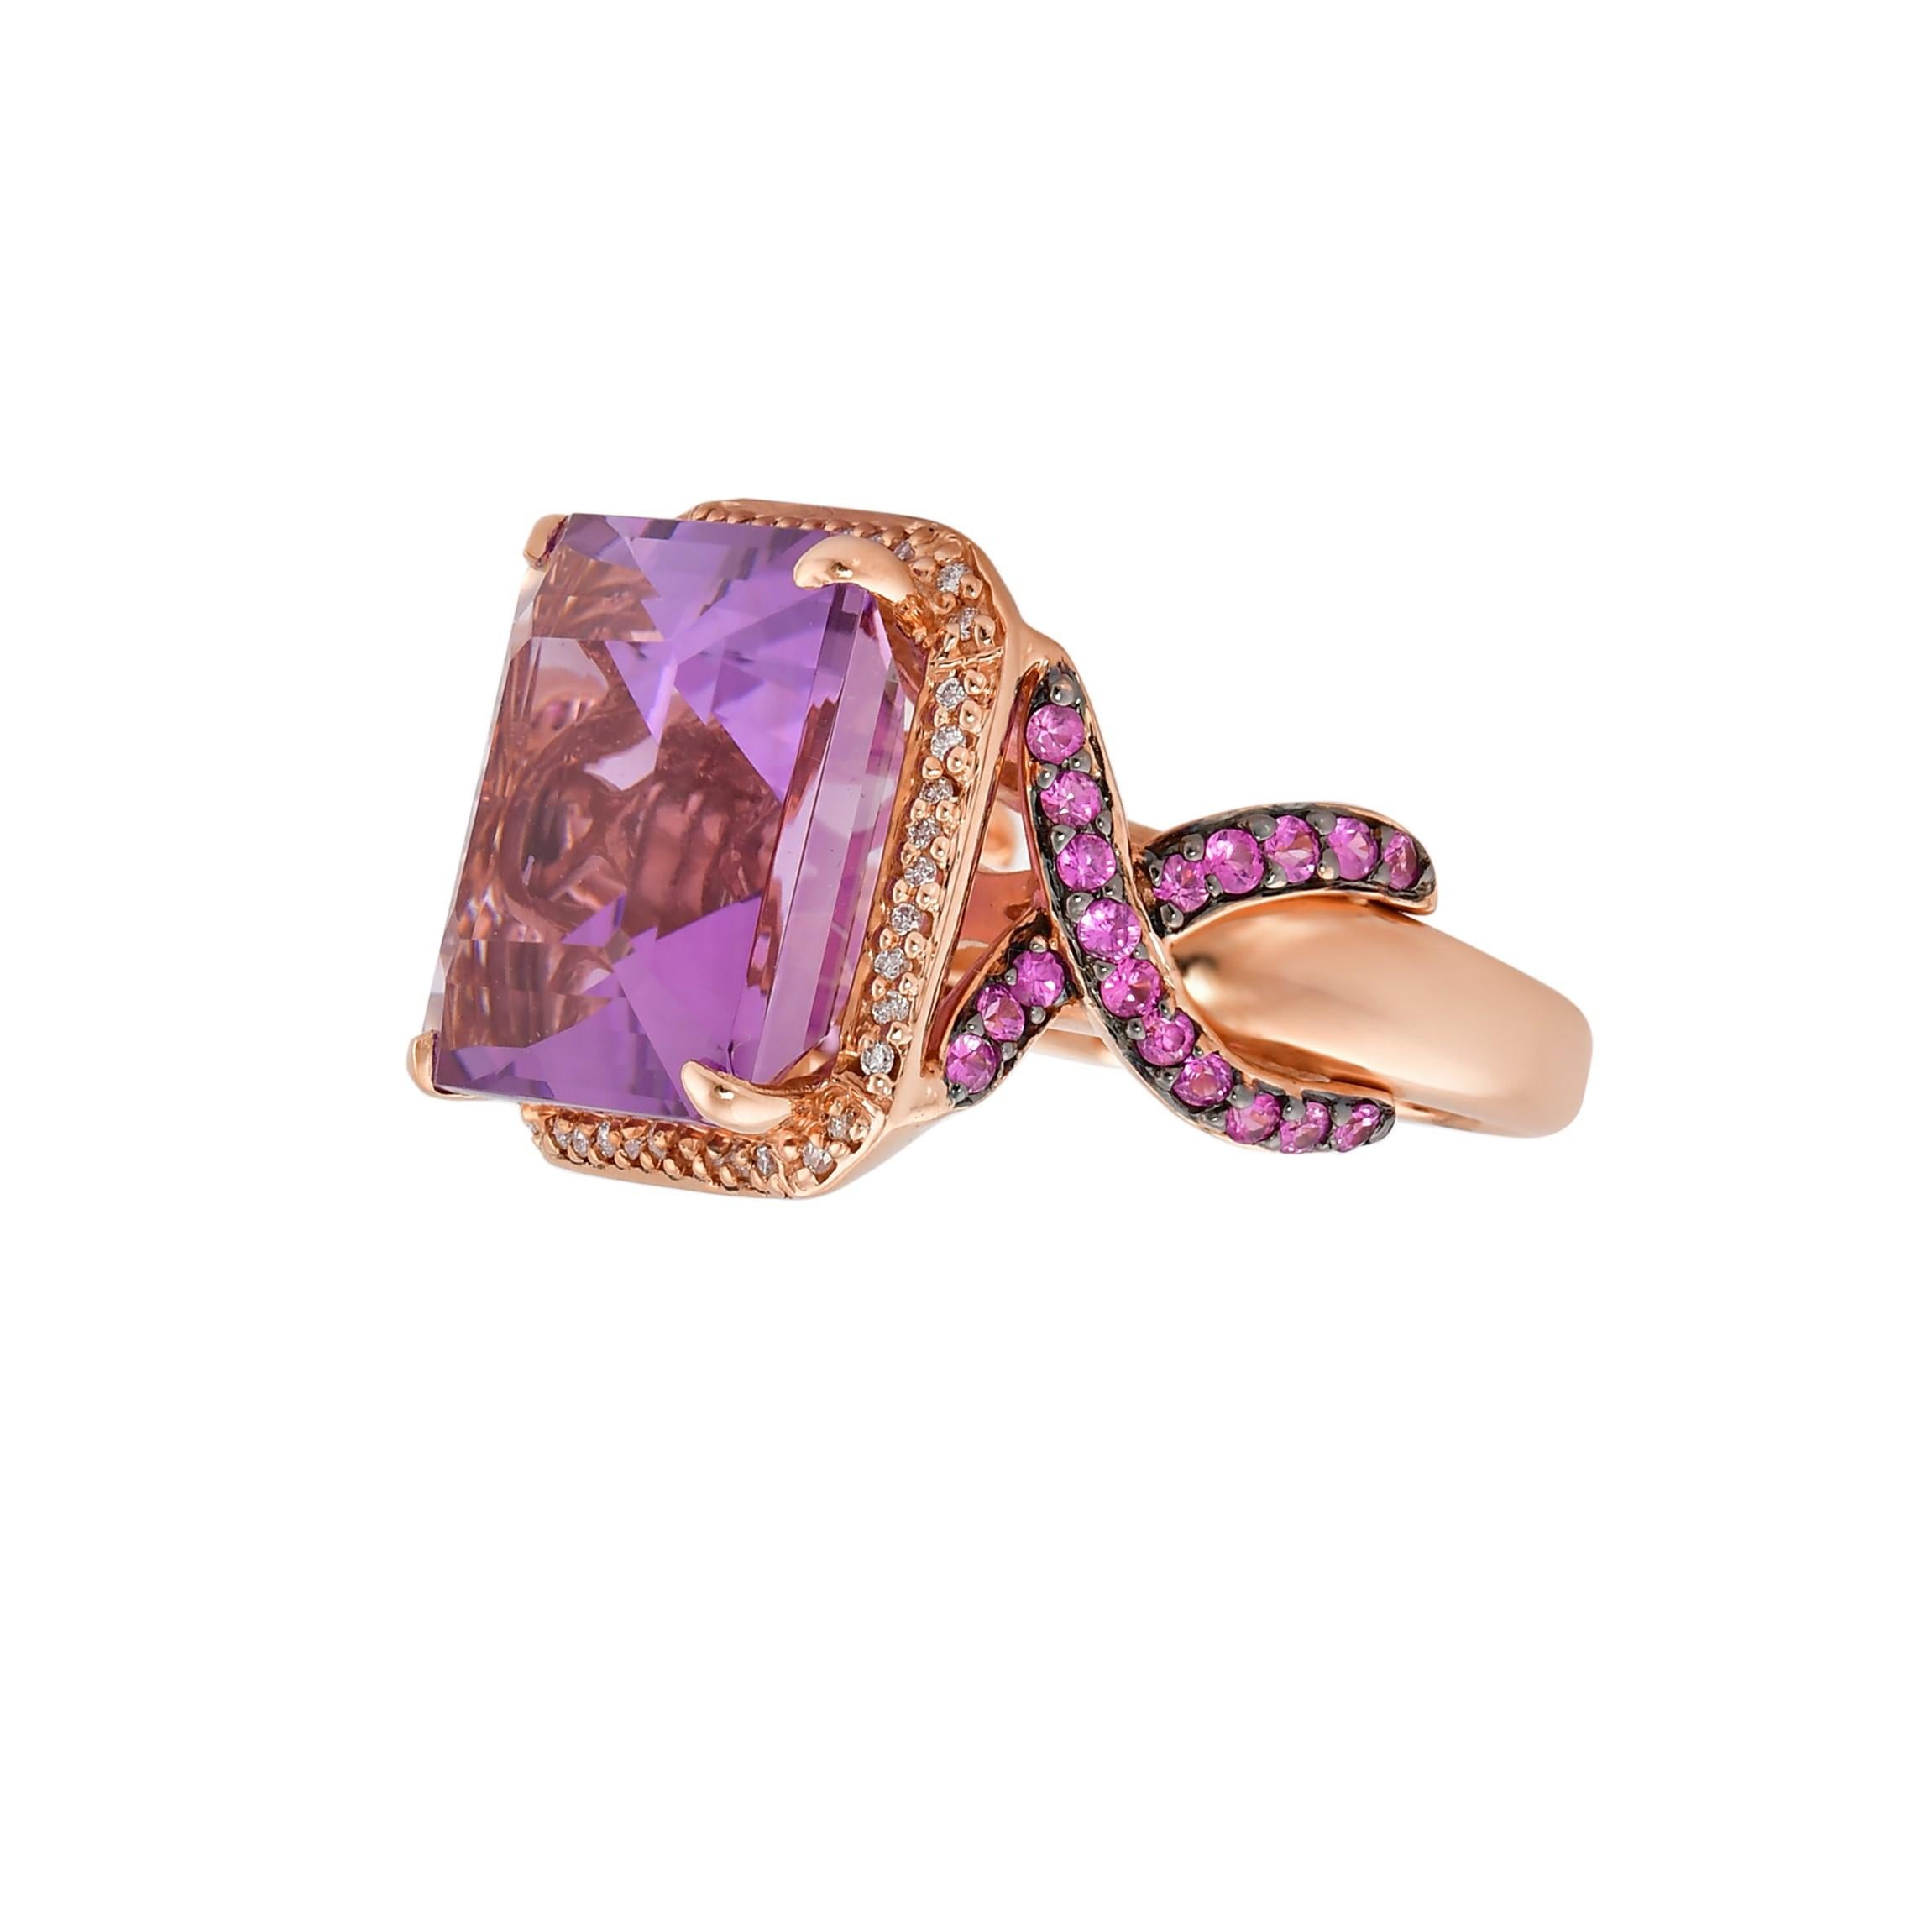 Contemporary 11.6 Carat Amethyst, Pink Sapphire and Diamond Ring in 14 Karat Rose Gold